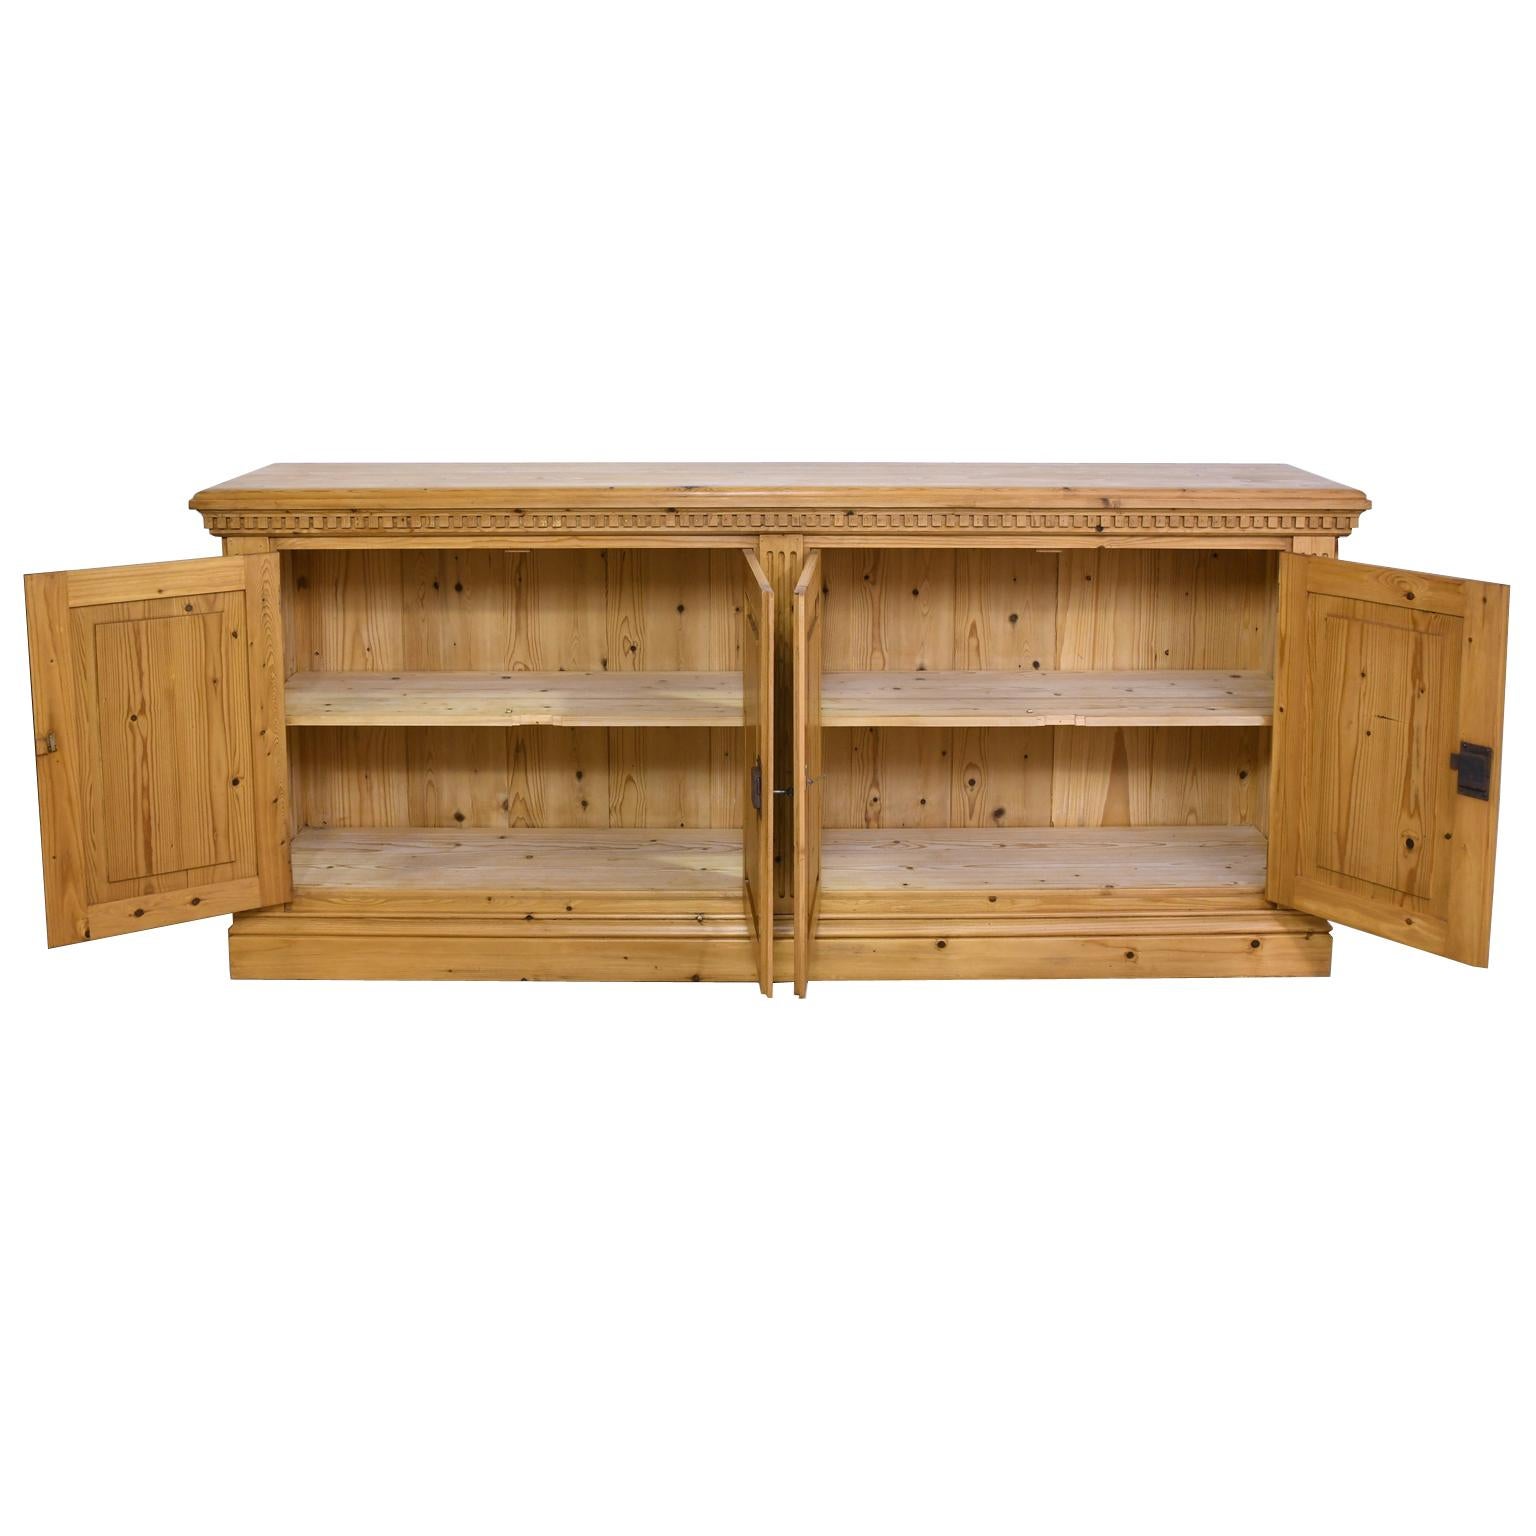 A sideboard or credenza made to order in our workshop and available in custom sizes, different woods and custom finishes. As shown, the sideboard is in repurposed antique pine in a light, honey-colored tone with a wax finish. Features a dental